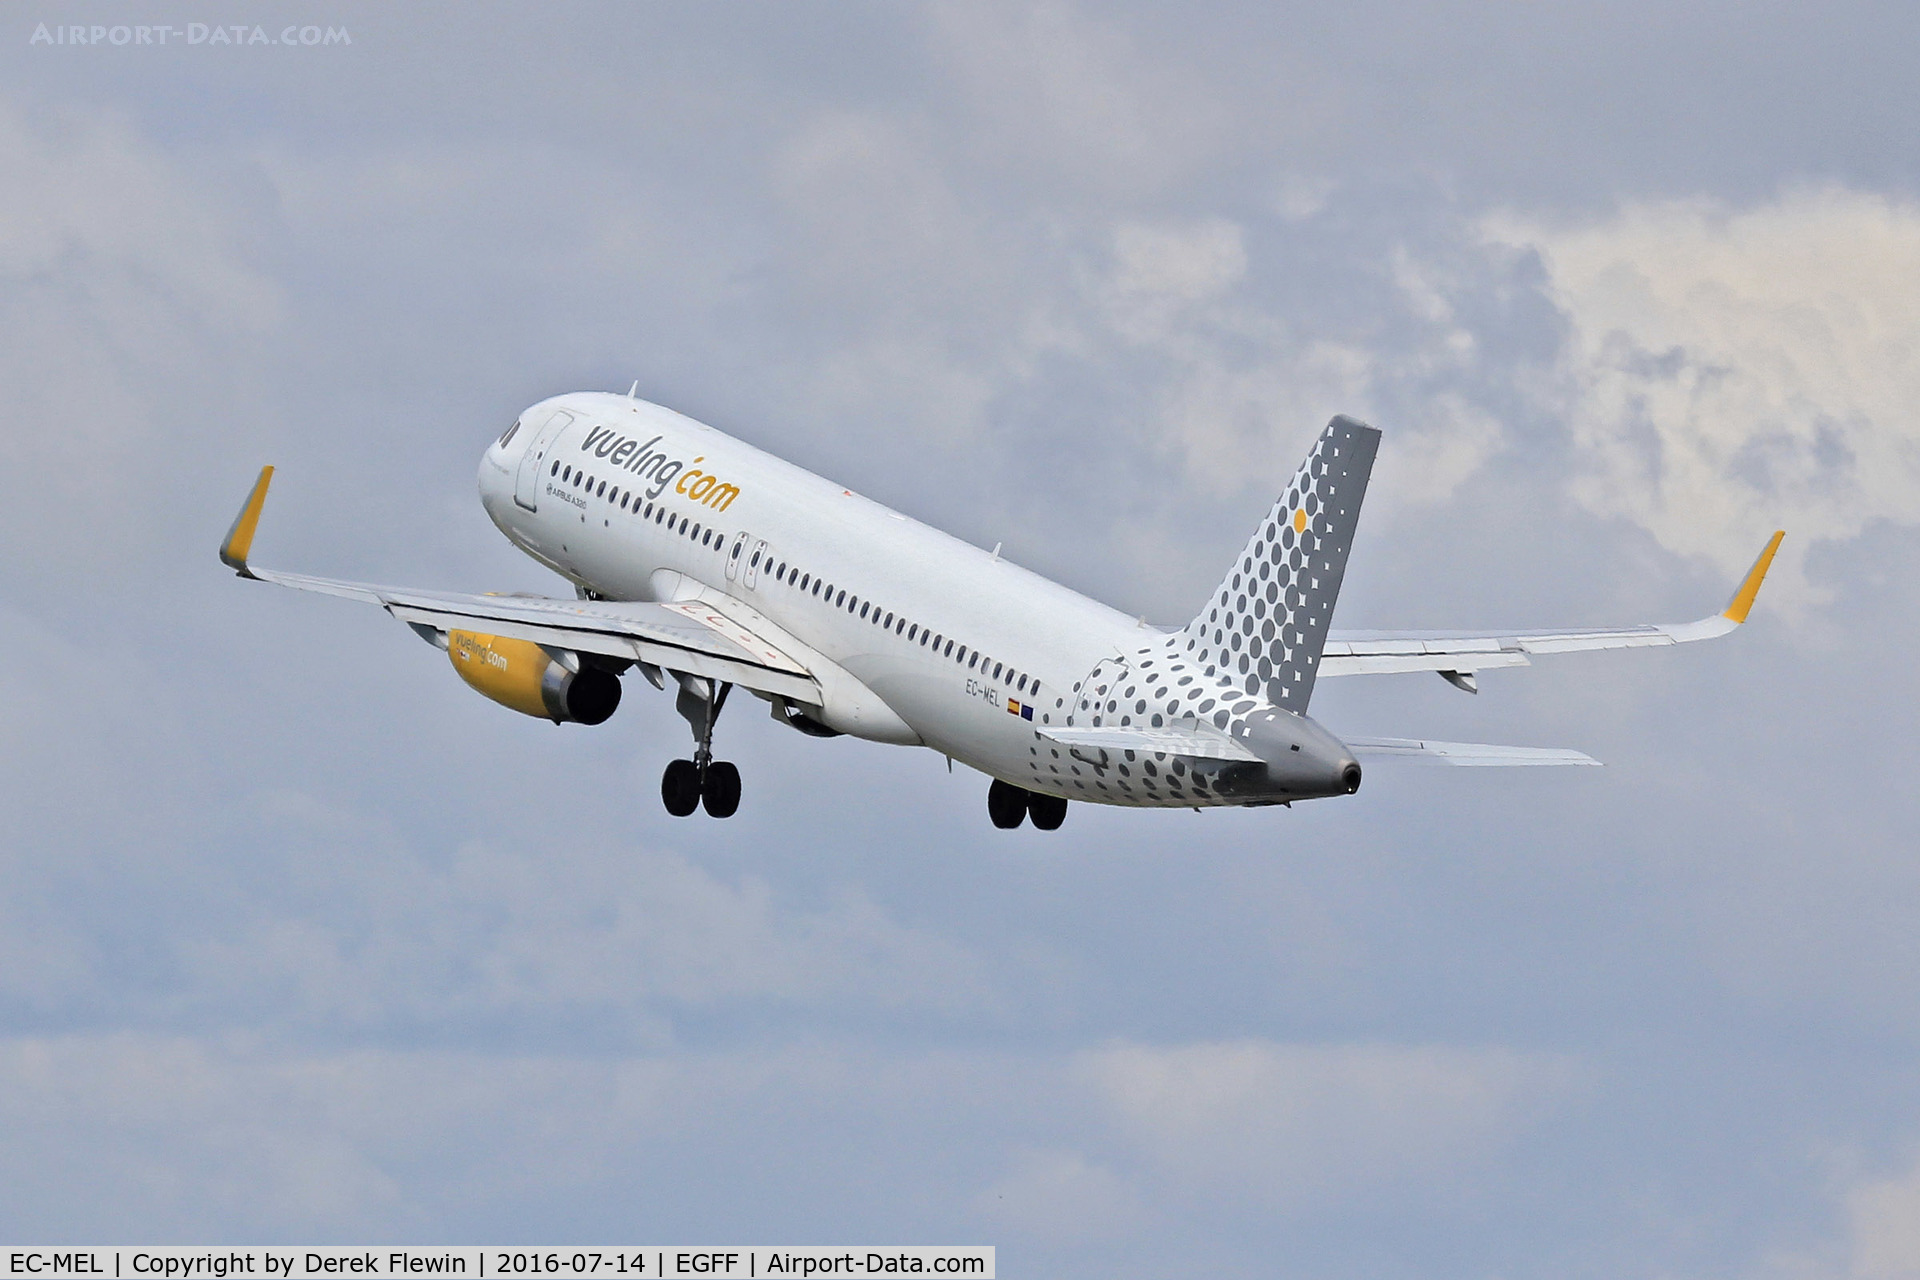 EC-MEL, 2015 Airbus A320-232 C/N 6450, A320-232, Vueling Airlines, previously D-AXAT, call sign Vueling 12EX, seen departing runway 30 en-route to Palma Mallorca.